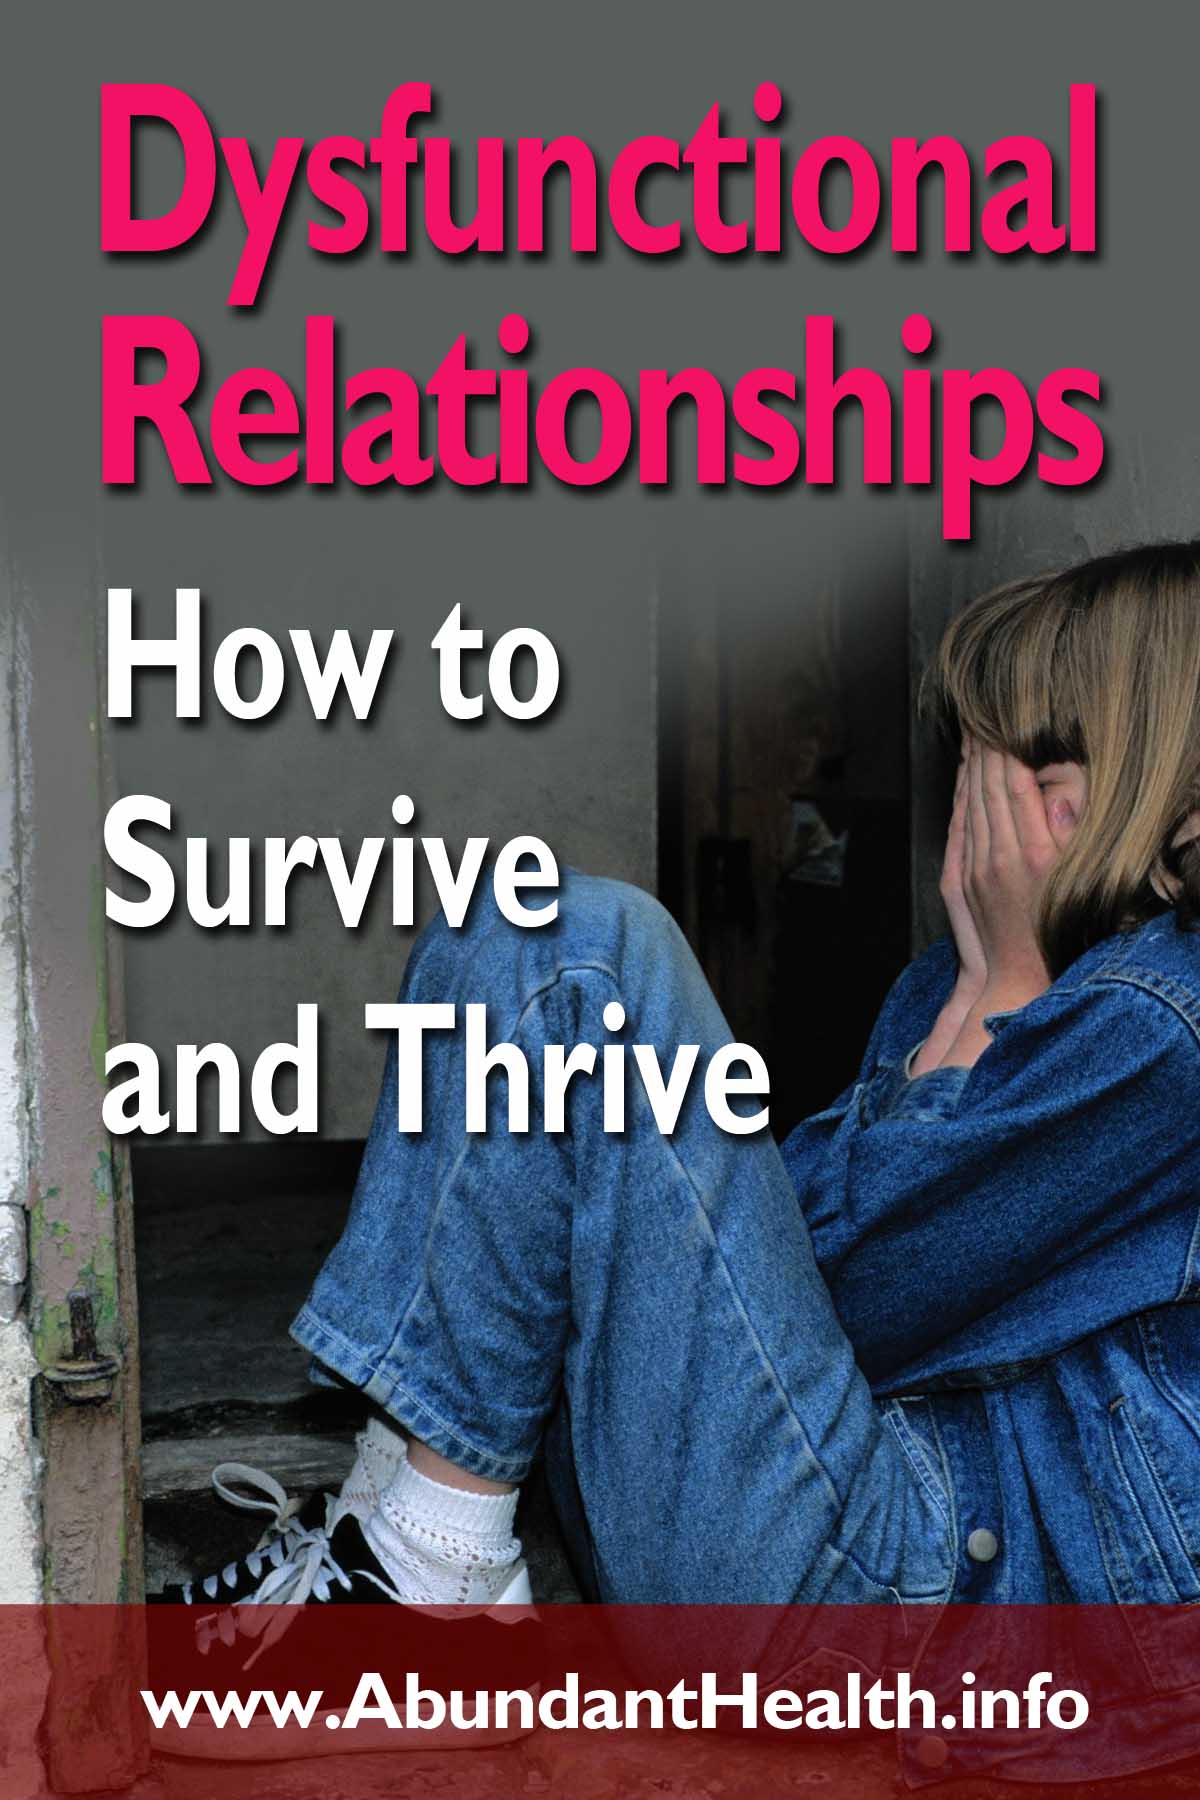 Dysfunctional Relationships - How to Survive and Thrive